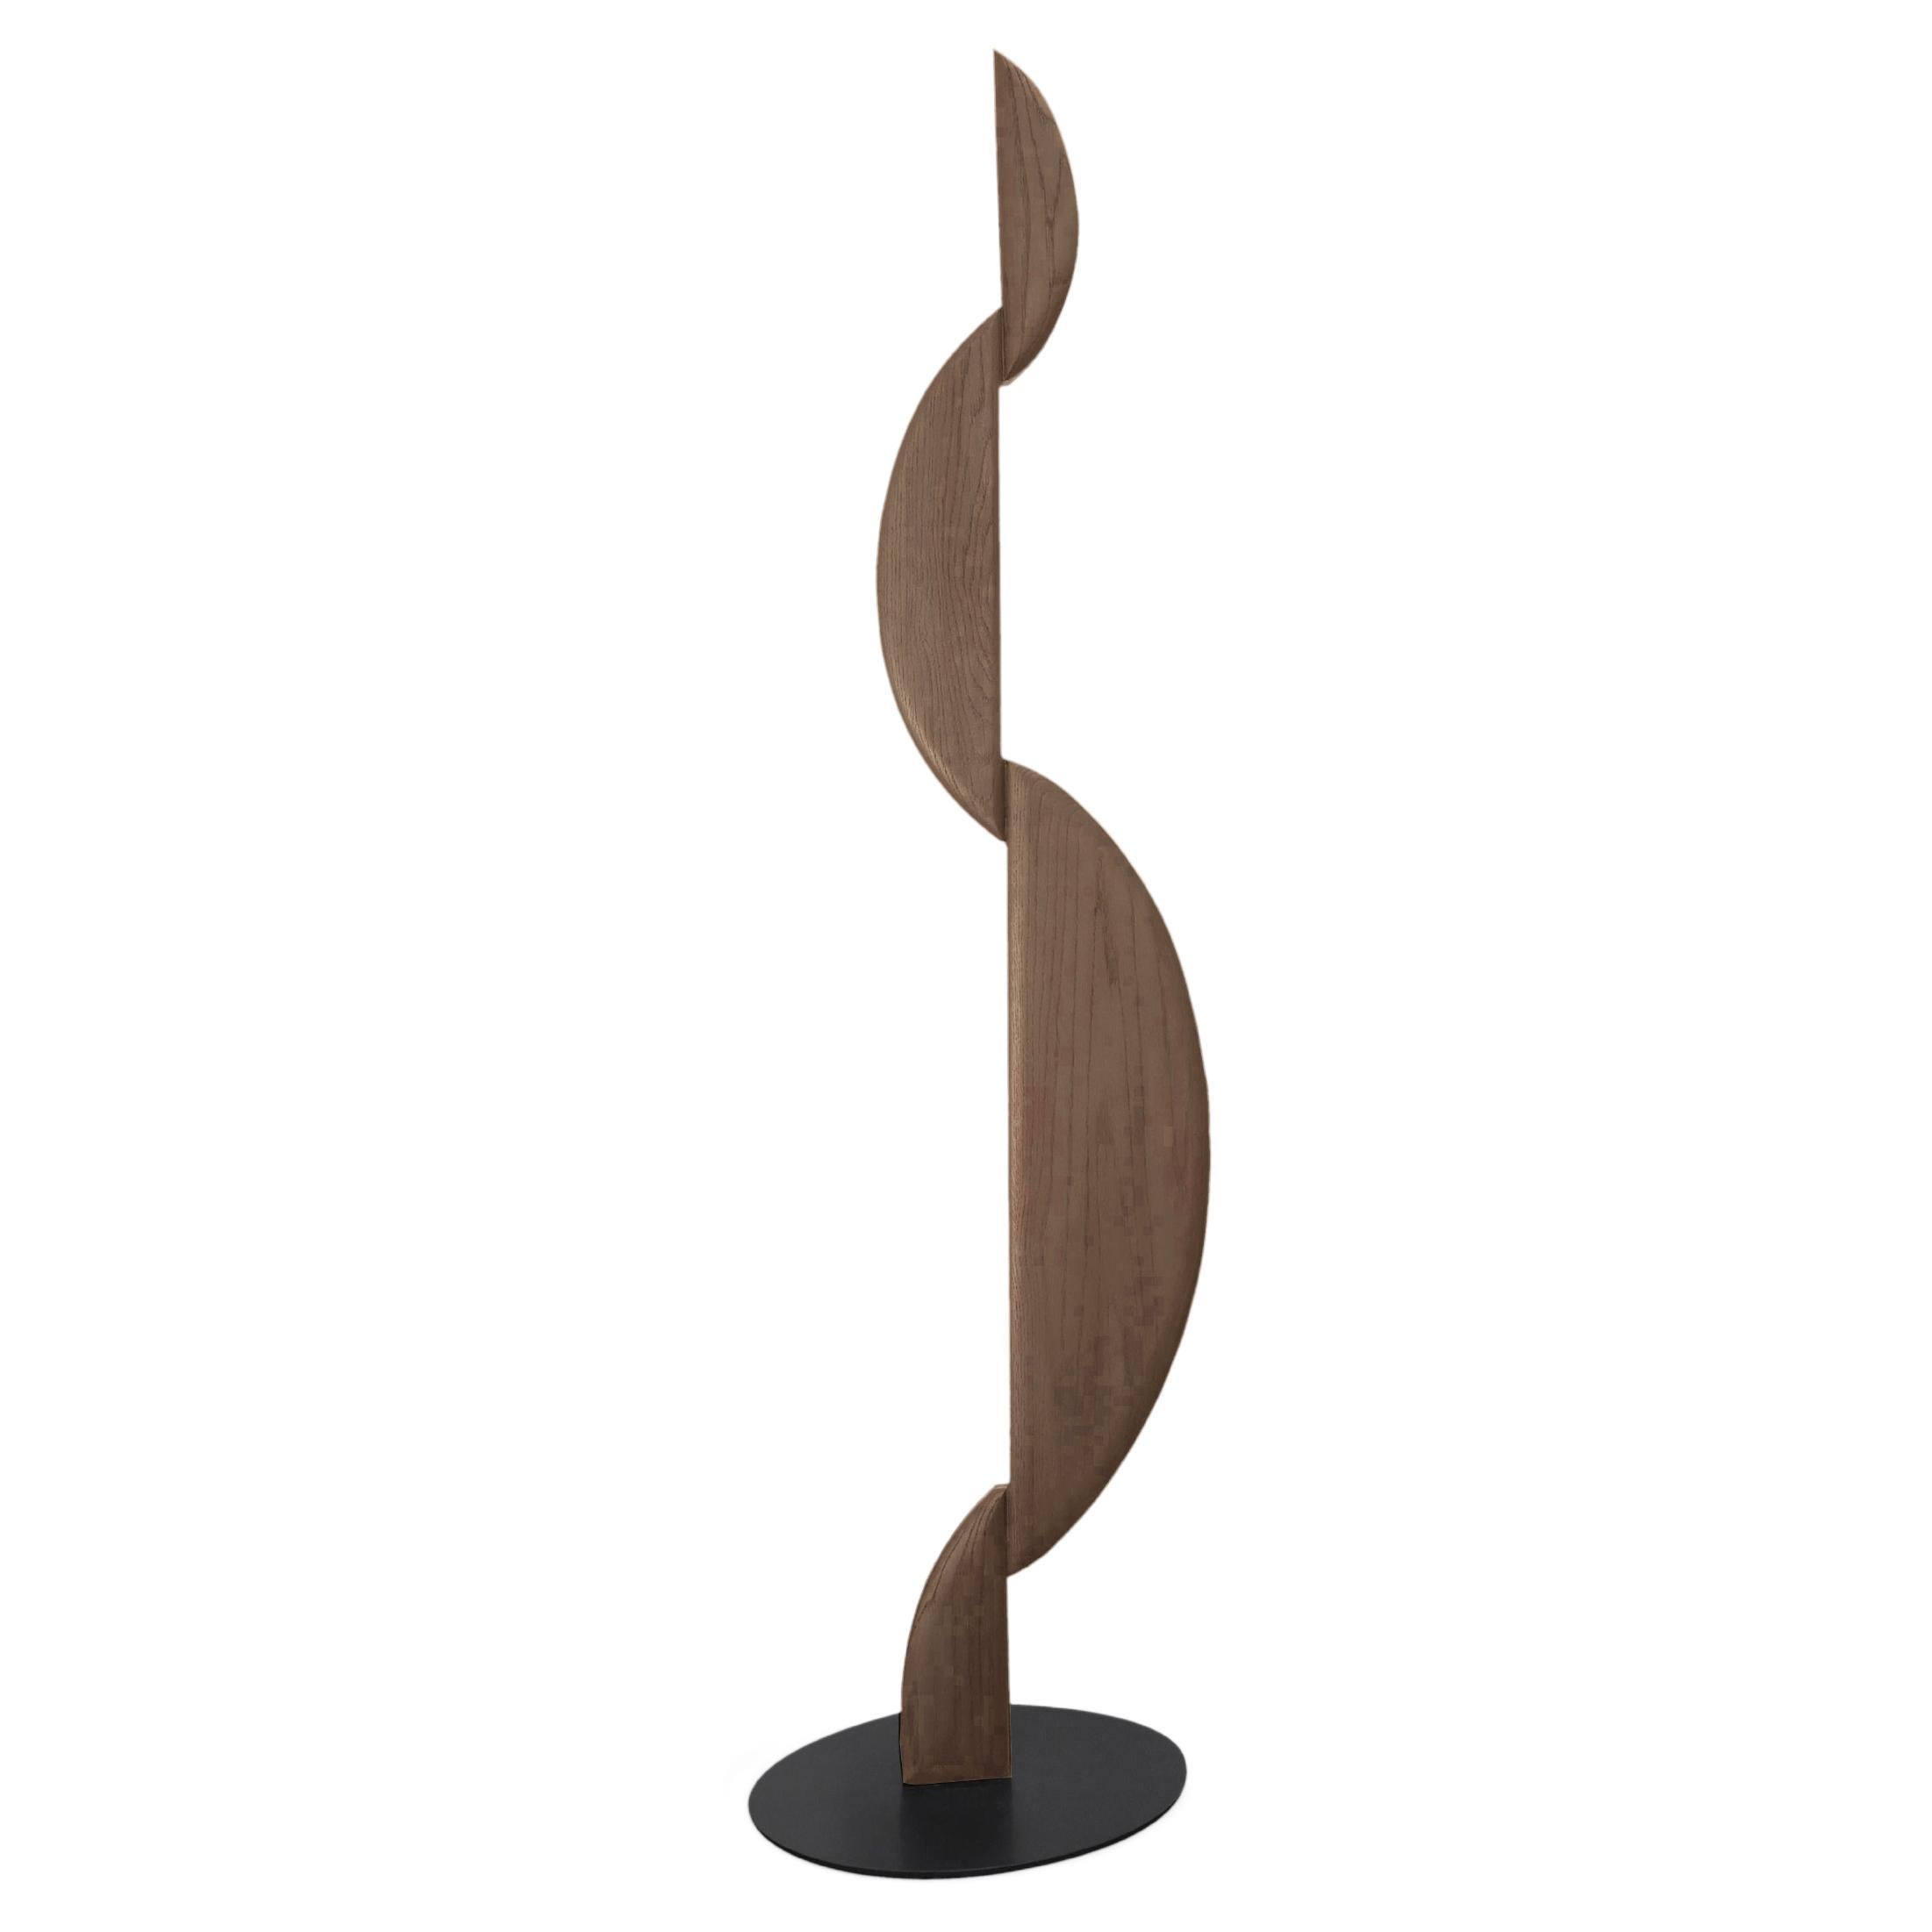 Noviembre I Standing Sculpture Inspired in Brancusi in Solid Walnut Wood by Joel